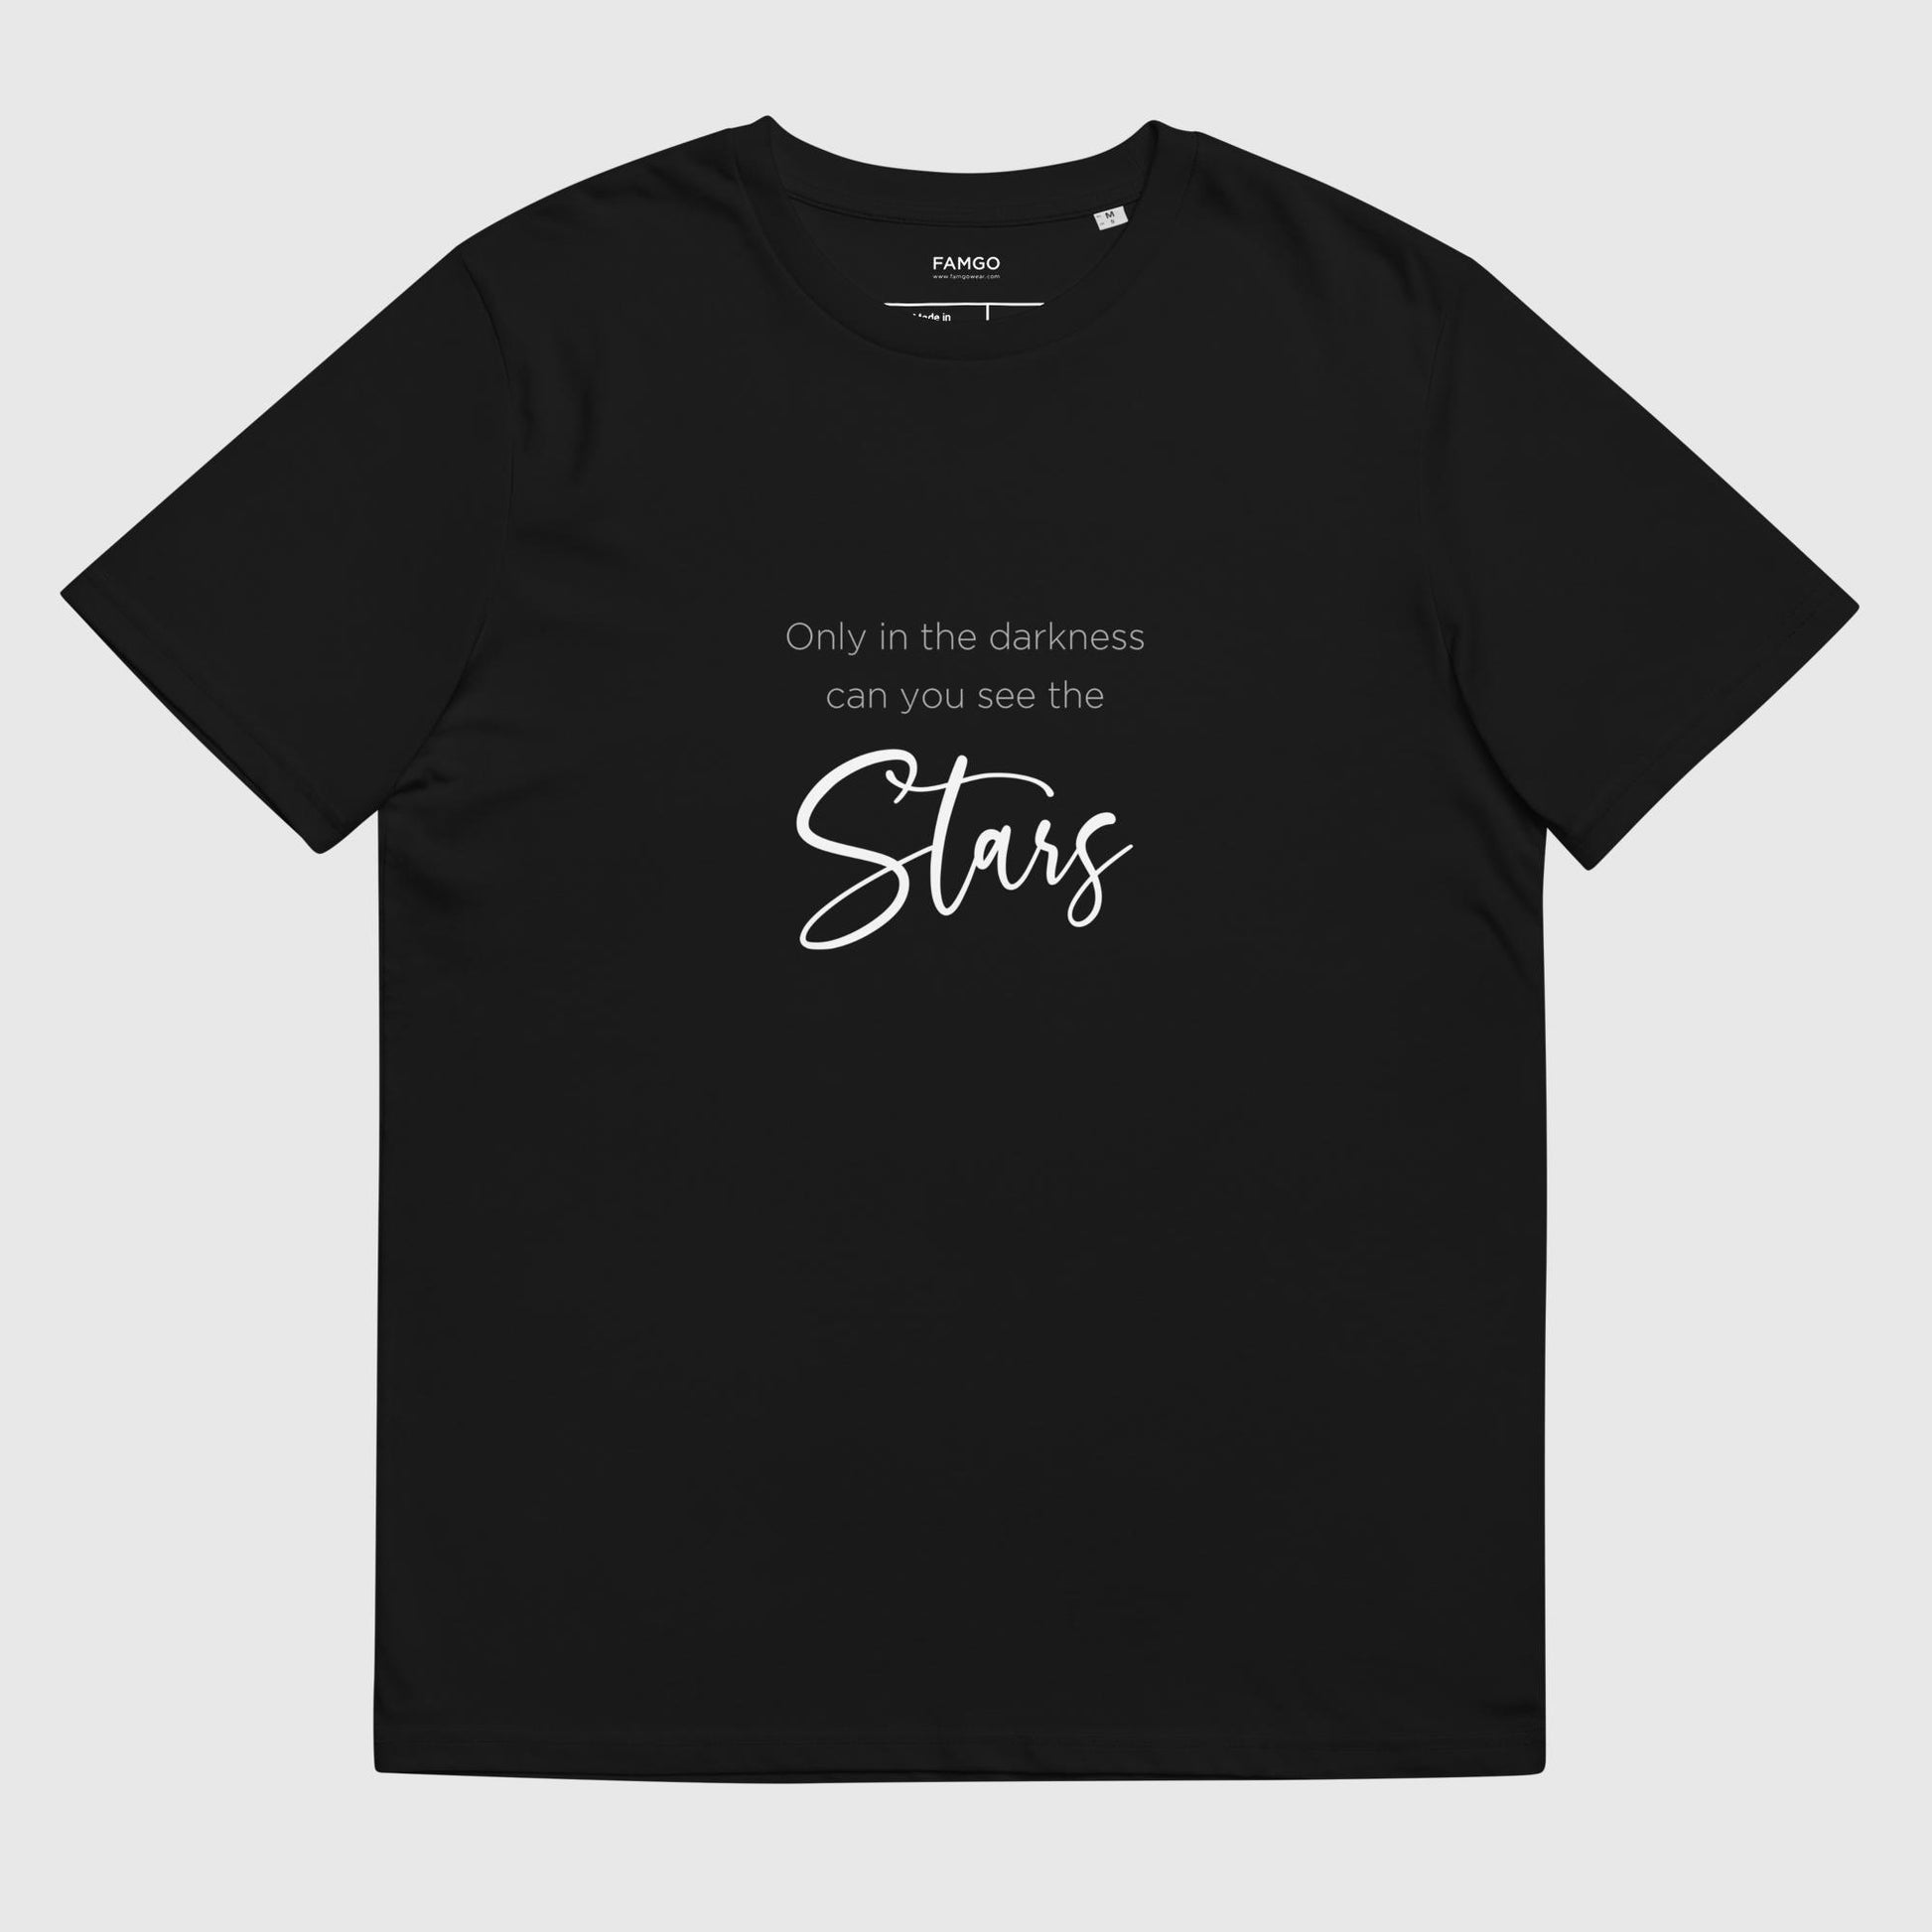 Men's black organic cotton t-shirt that features Dr. Martin Luther King Jr's inspirational quote, "Only In The Darkness Can You See The Stars."